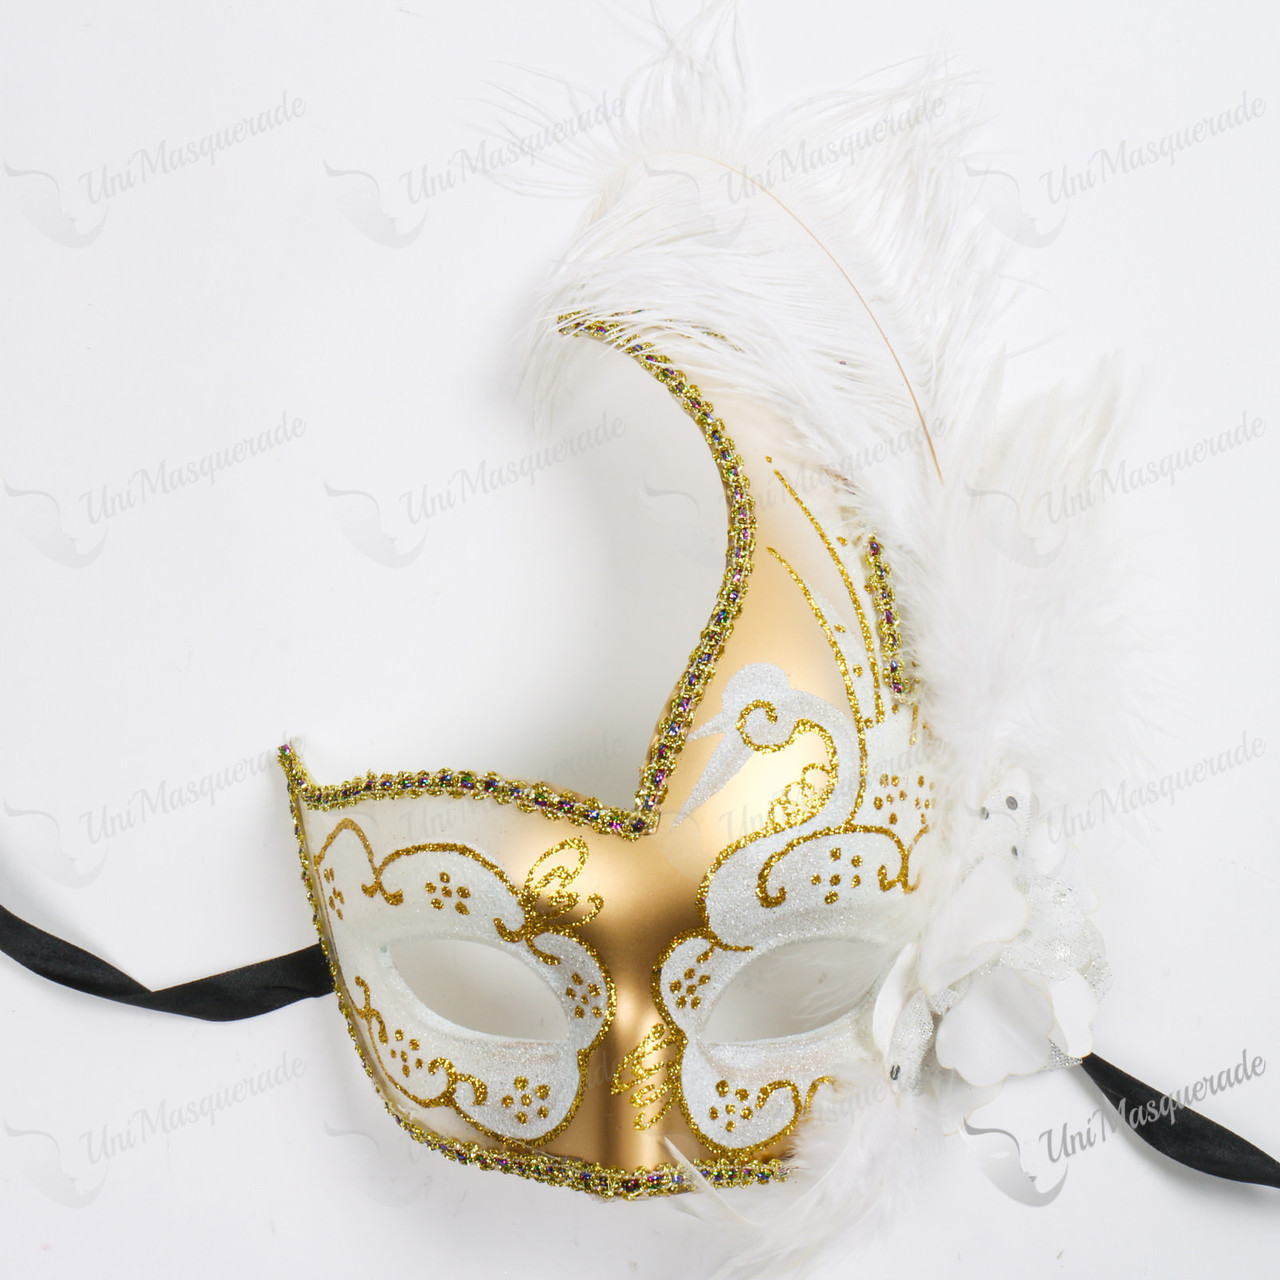 Feather Masquerade Mask, Mardi Gras Mask, Gold & White Mask With